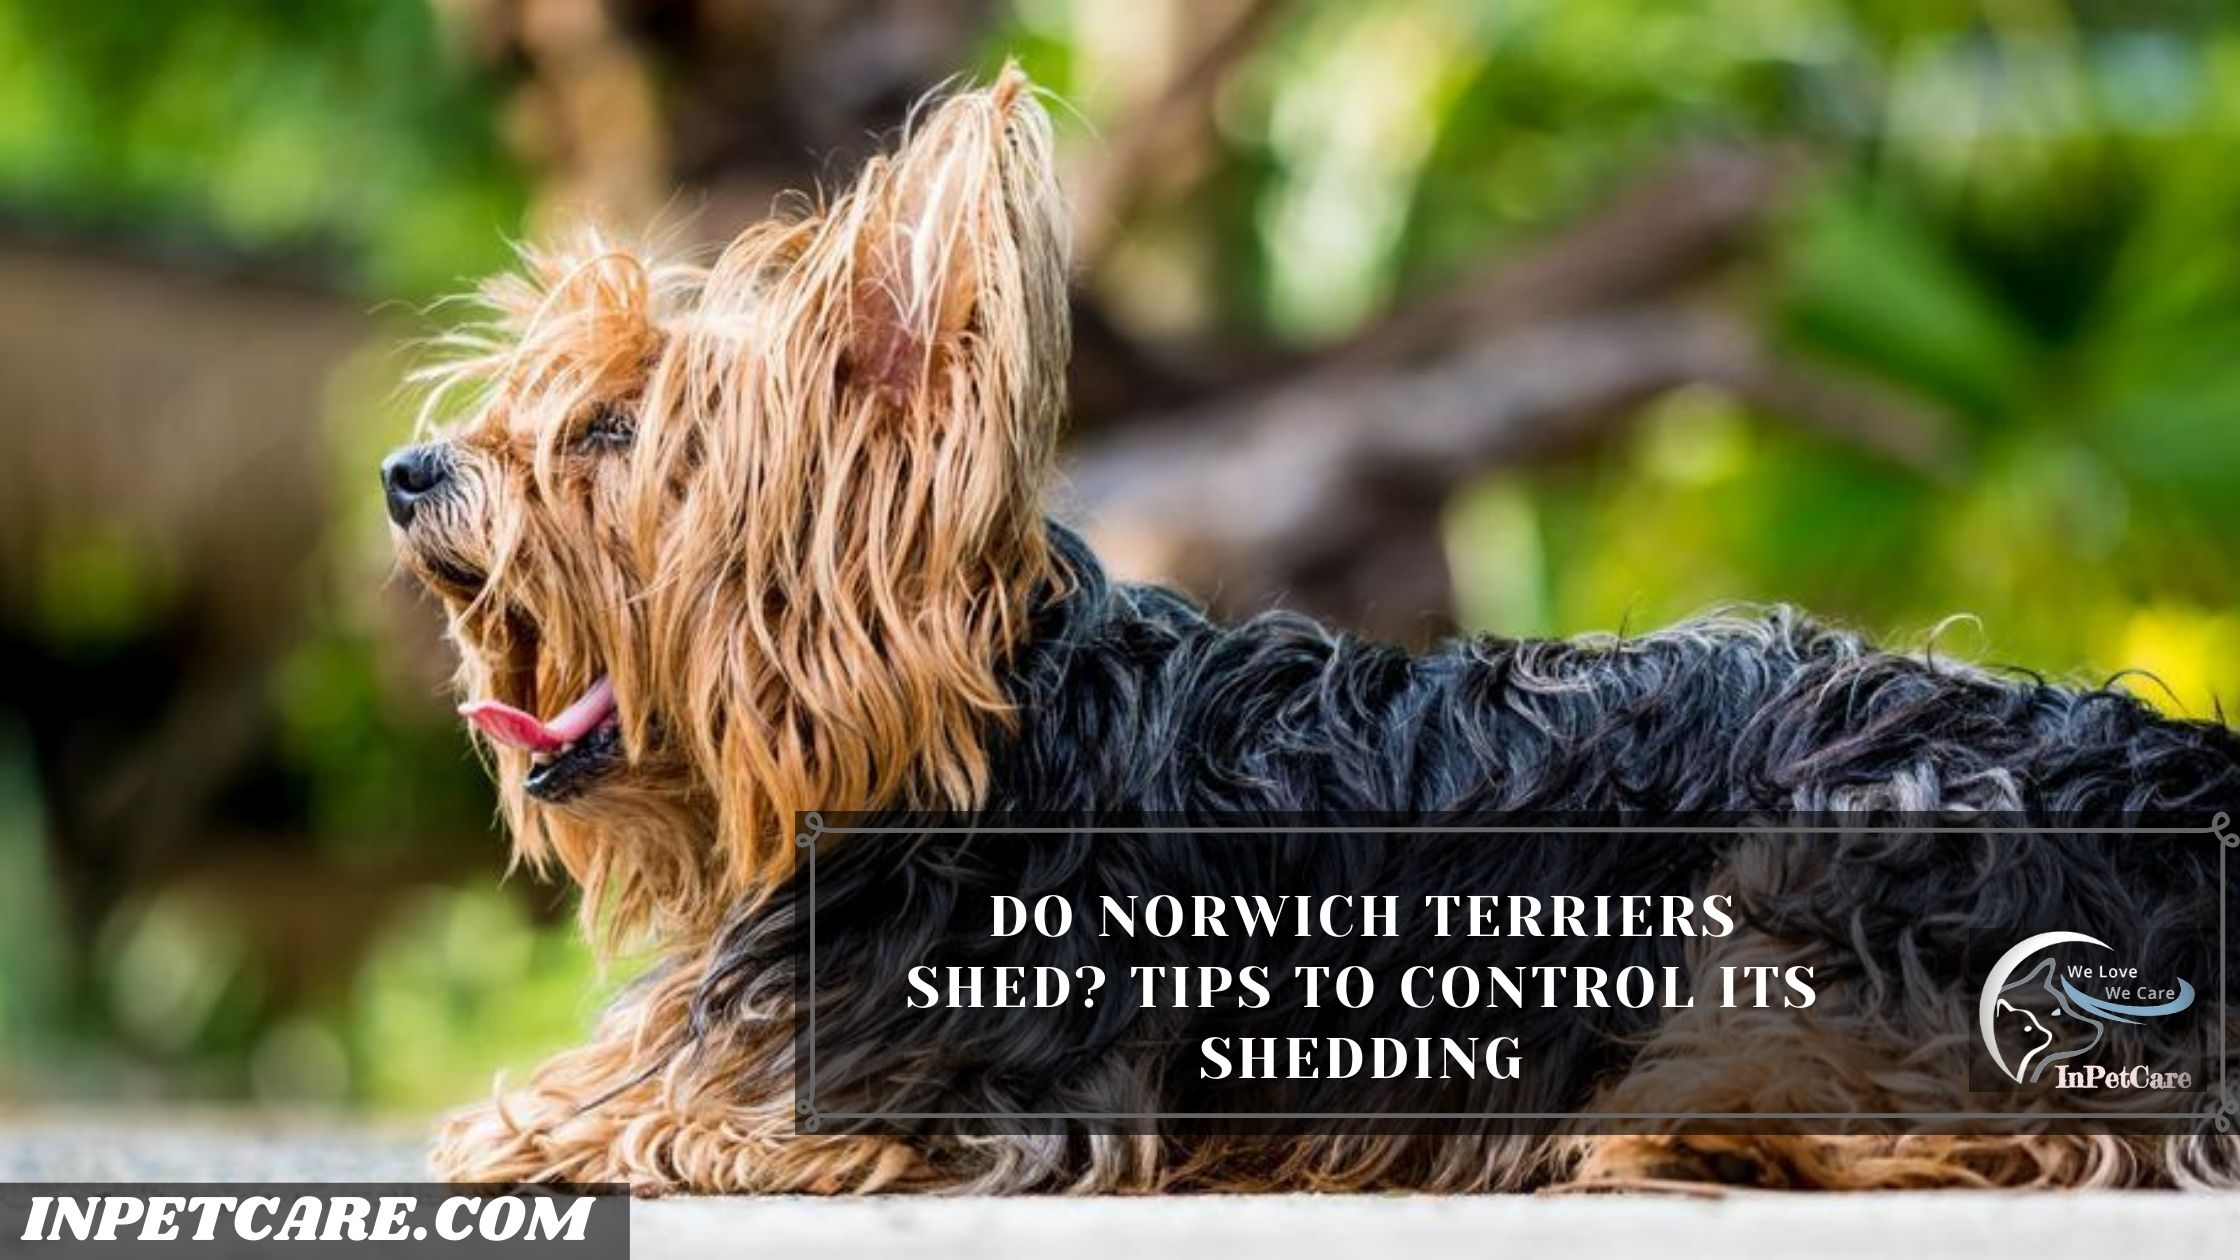 Do Norwich Terriers Shed? Tips To Control Its Shedding